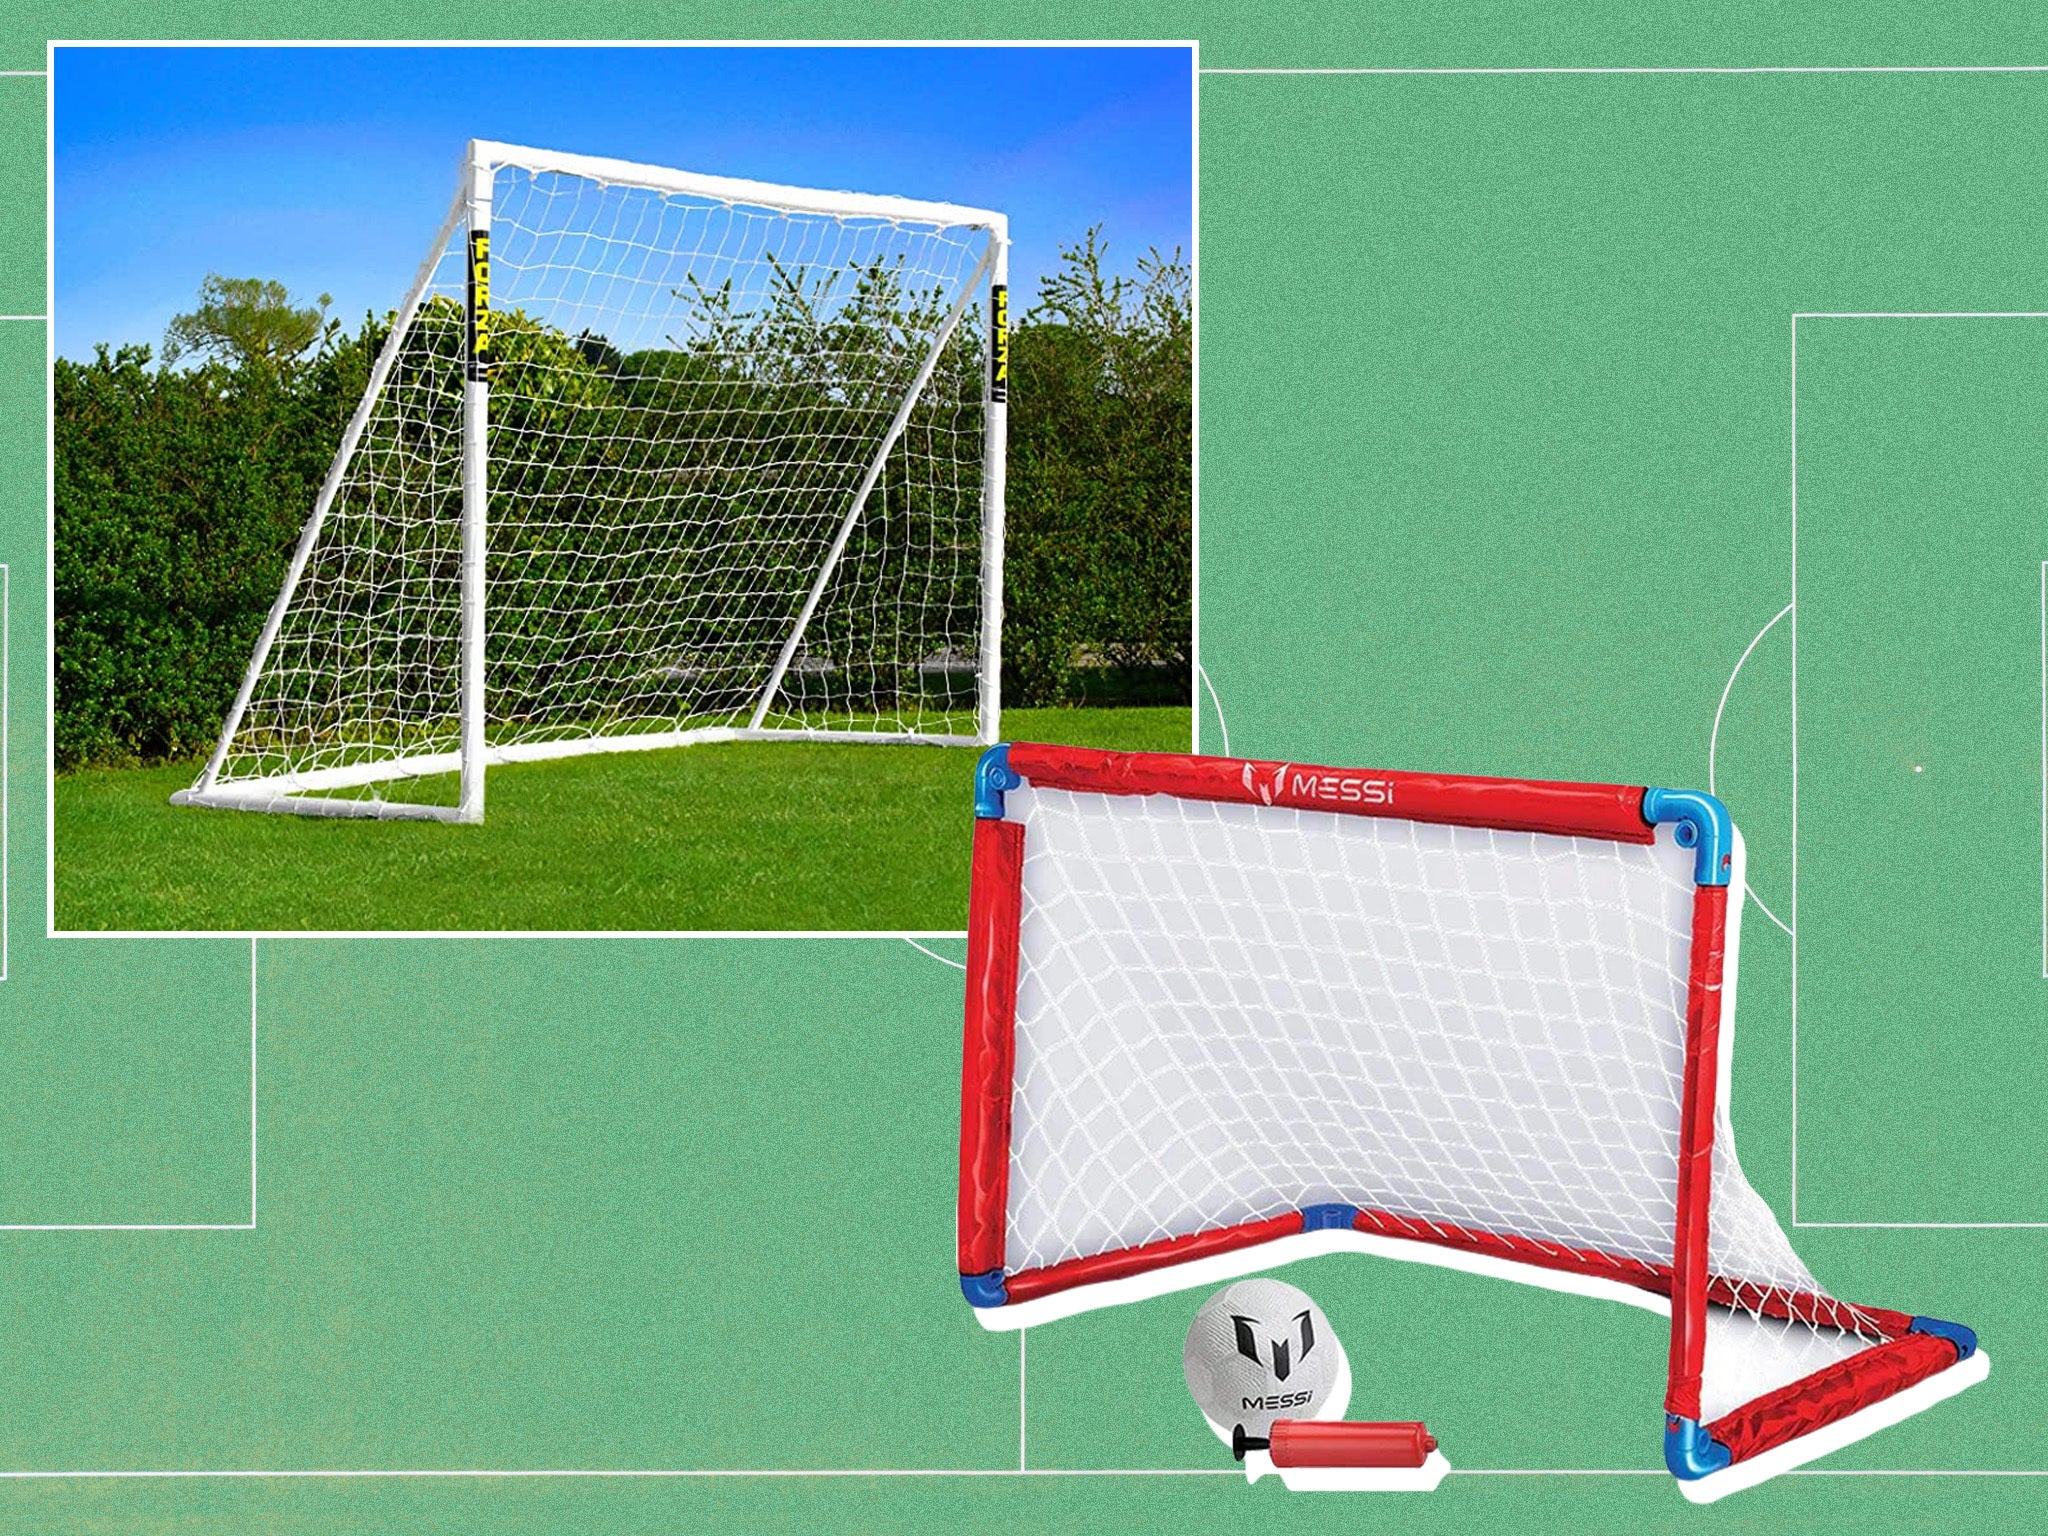 Whether you just want a kick-about with the kids or a serious 5-a-side